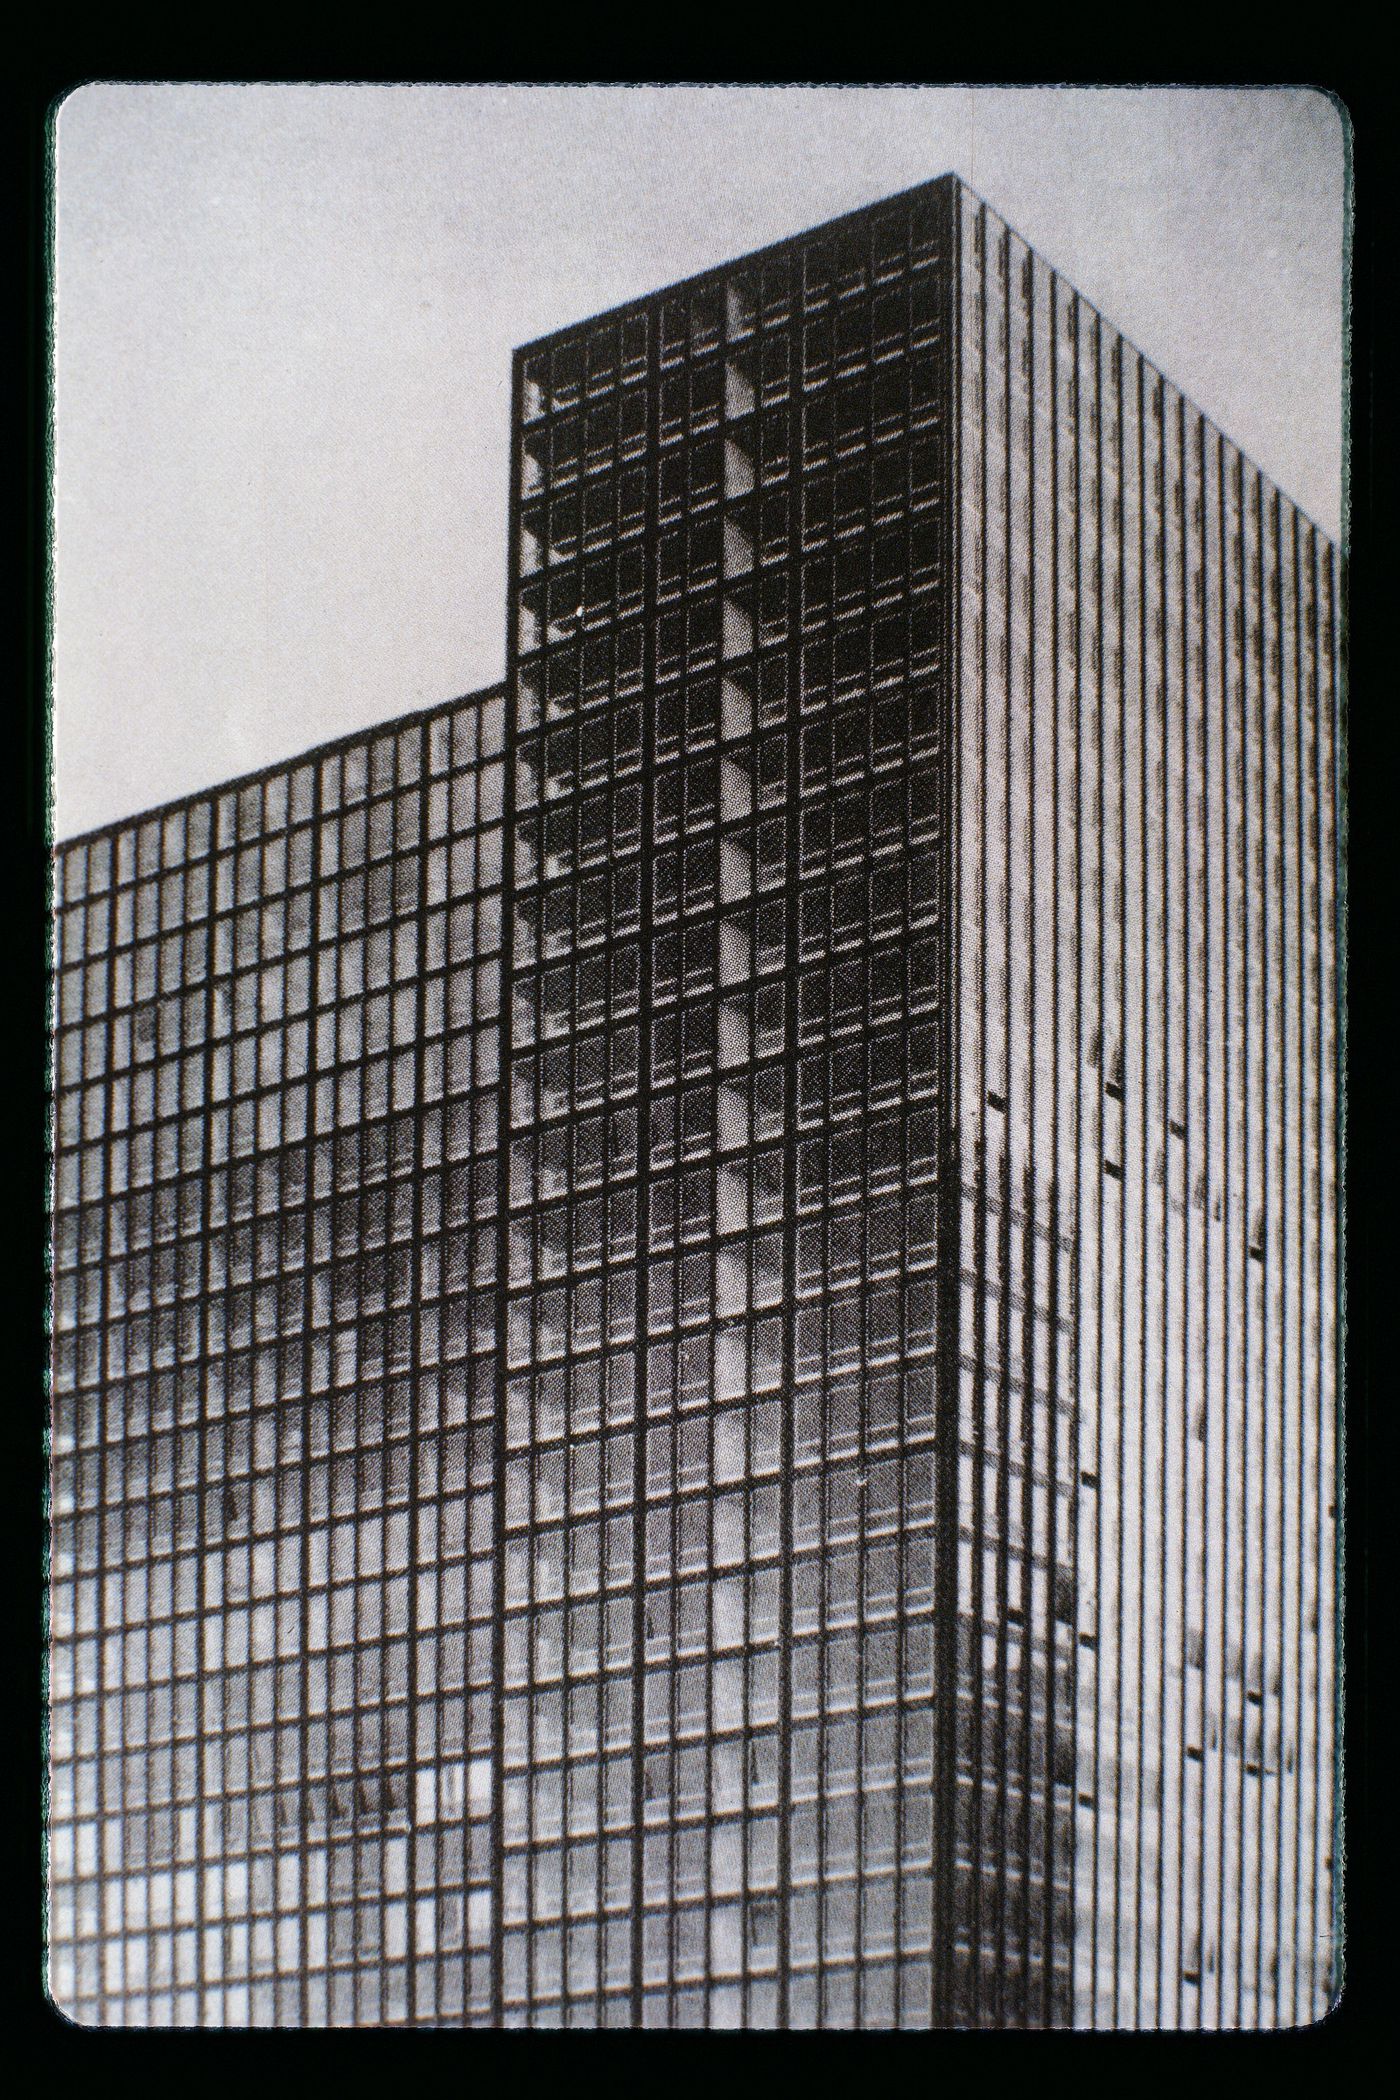 Slide of a photograph of Lake Shore Drive Apartments, Chicago, by Mies van der Rohe